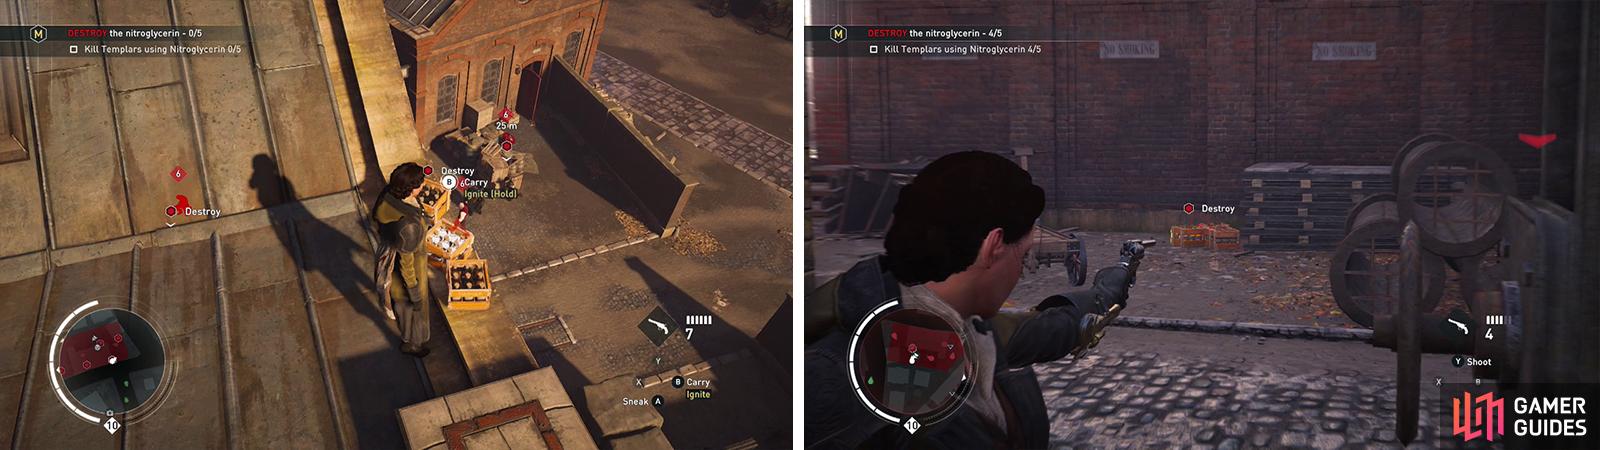 Use the dynamite on the rooftop to kill enemies in the courtyard below (left). You can also shoot the dynamite crates to blow them up (right).